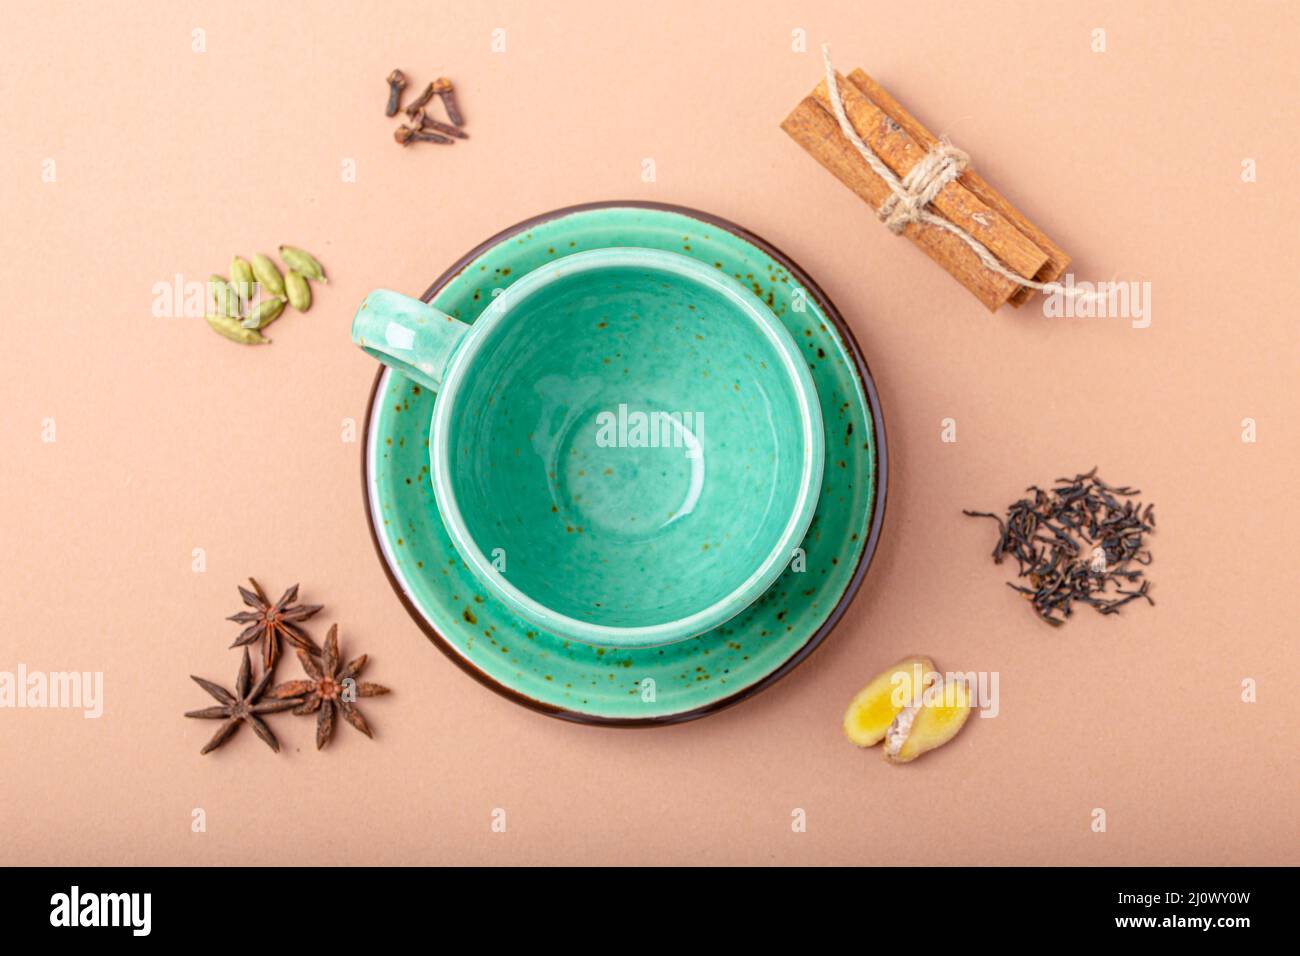 Empty green teacup and spices ingredients for making healthy Indian tea drink masala chai Stock Photo